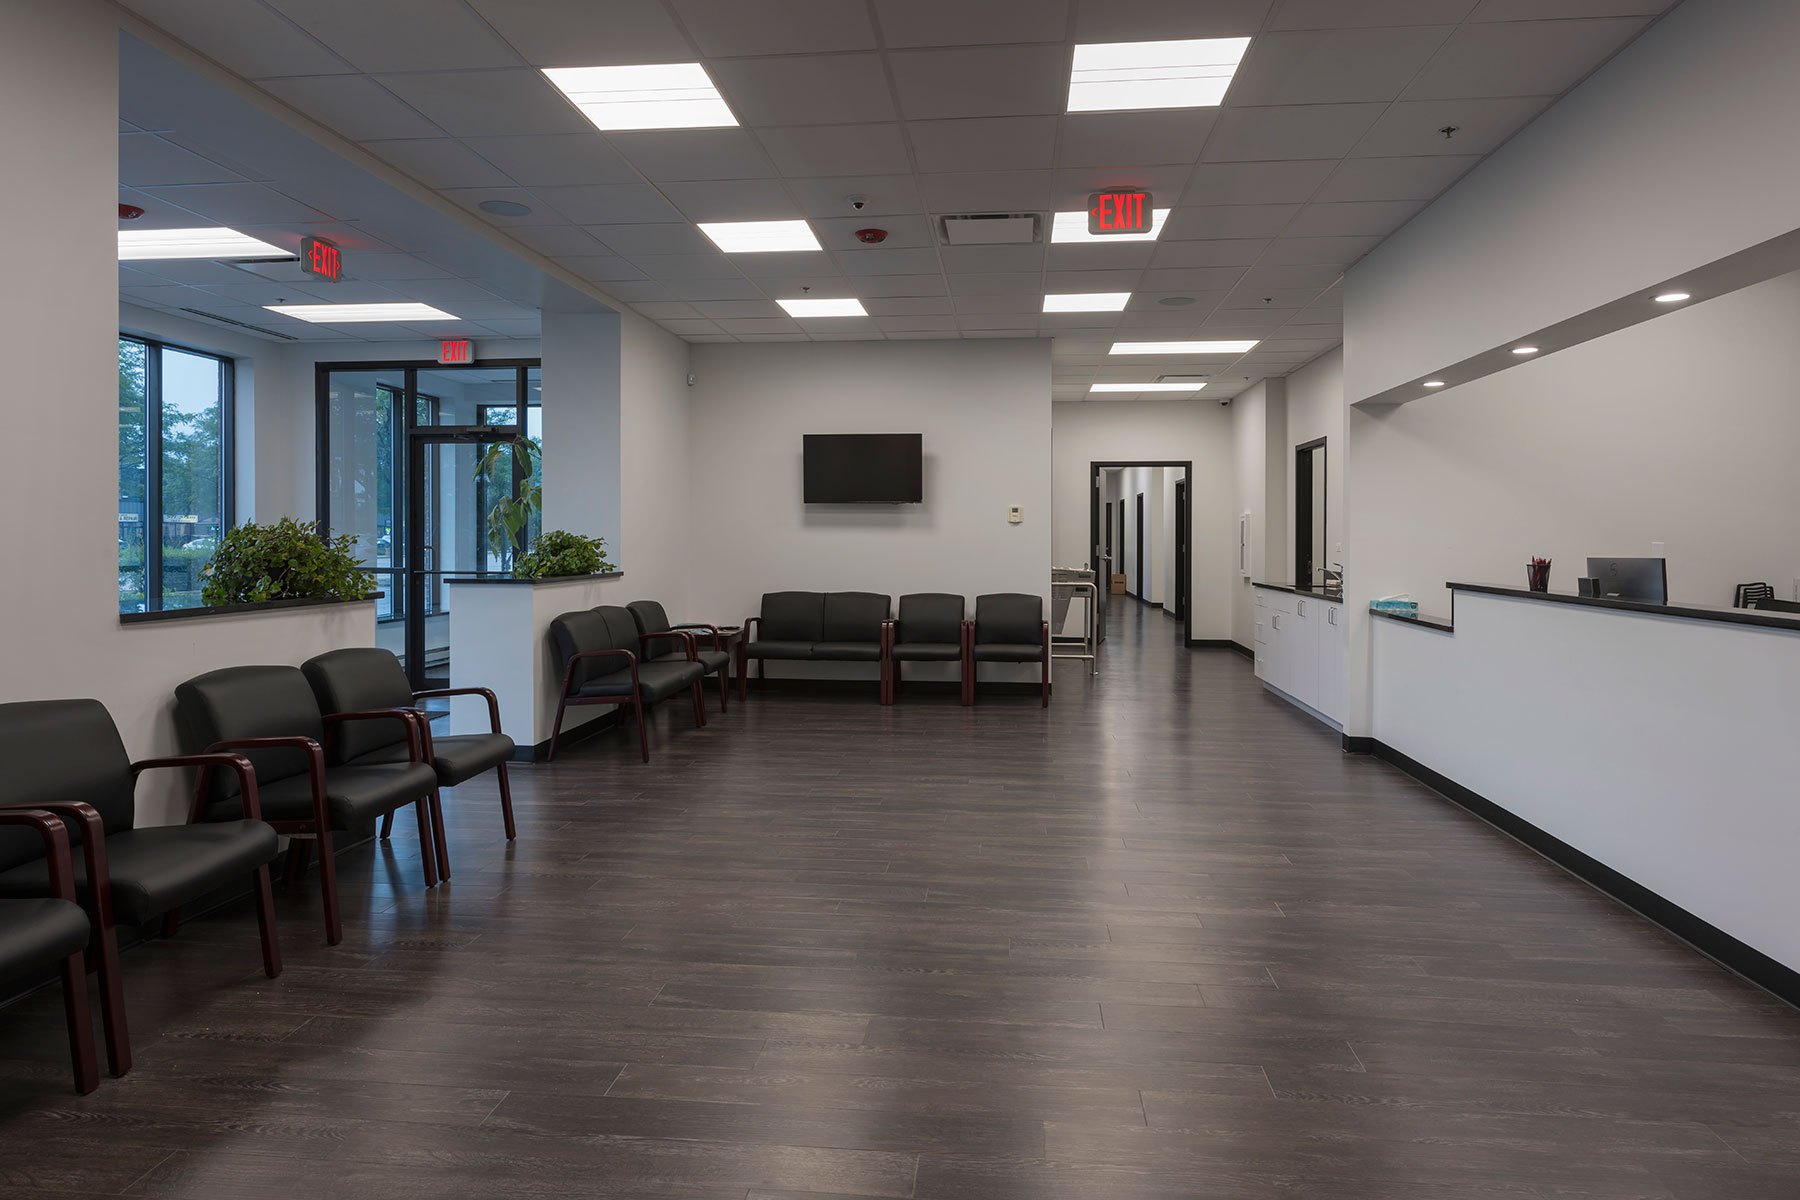 patient waiting room - Advanced Skin & MOHS Surgery Clinics, Morton Grove Custom Home. America's Custom Home Builders: New Construction, Remodeling, Restoration Services. Residential and Commercial.